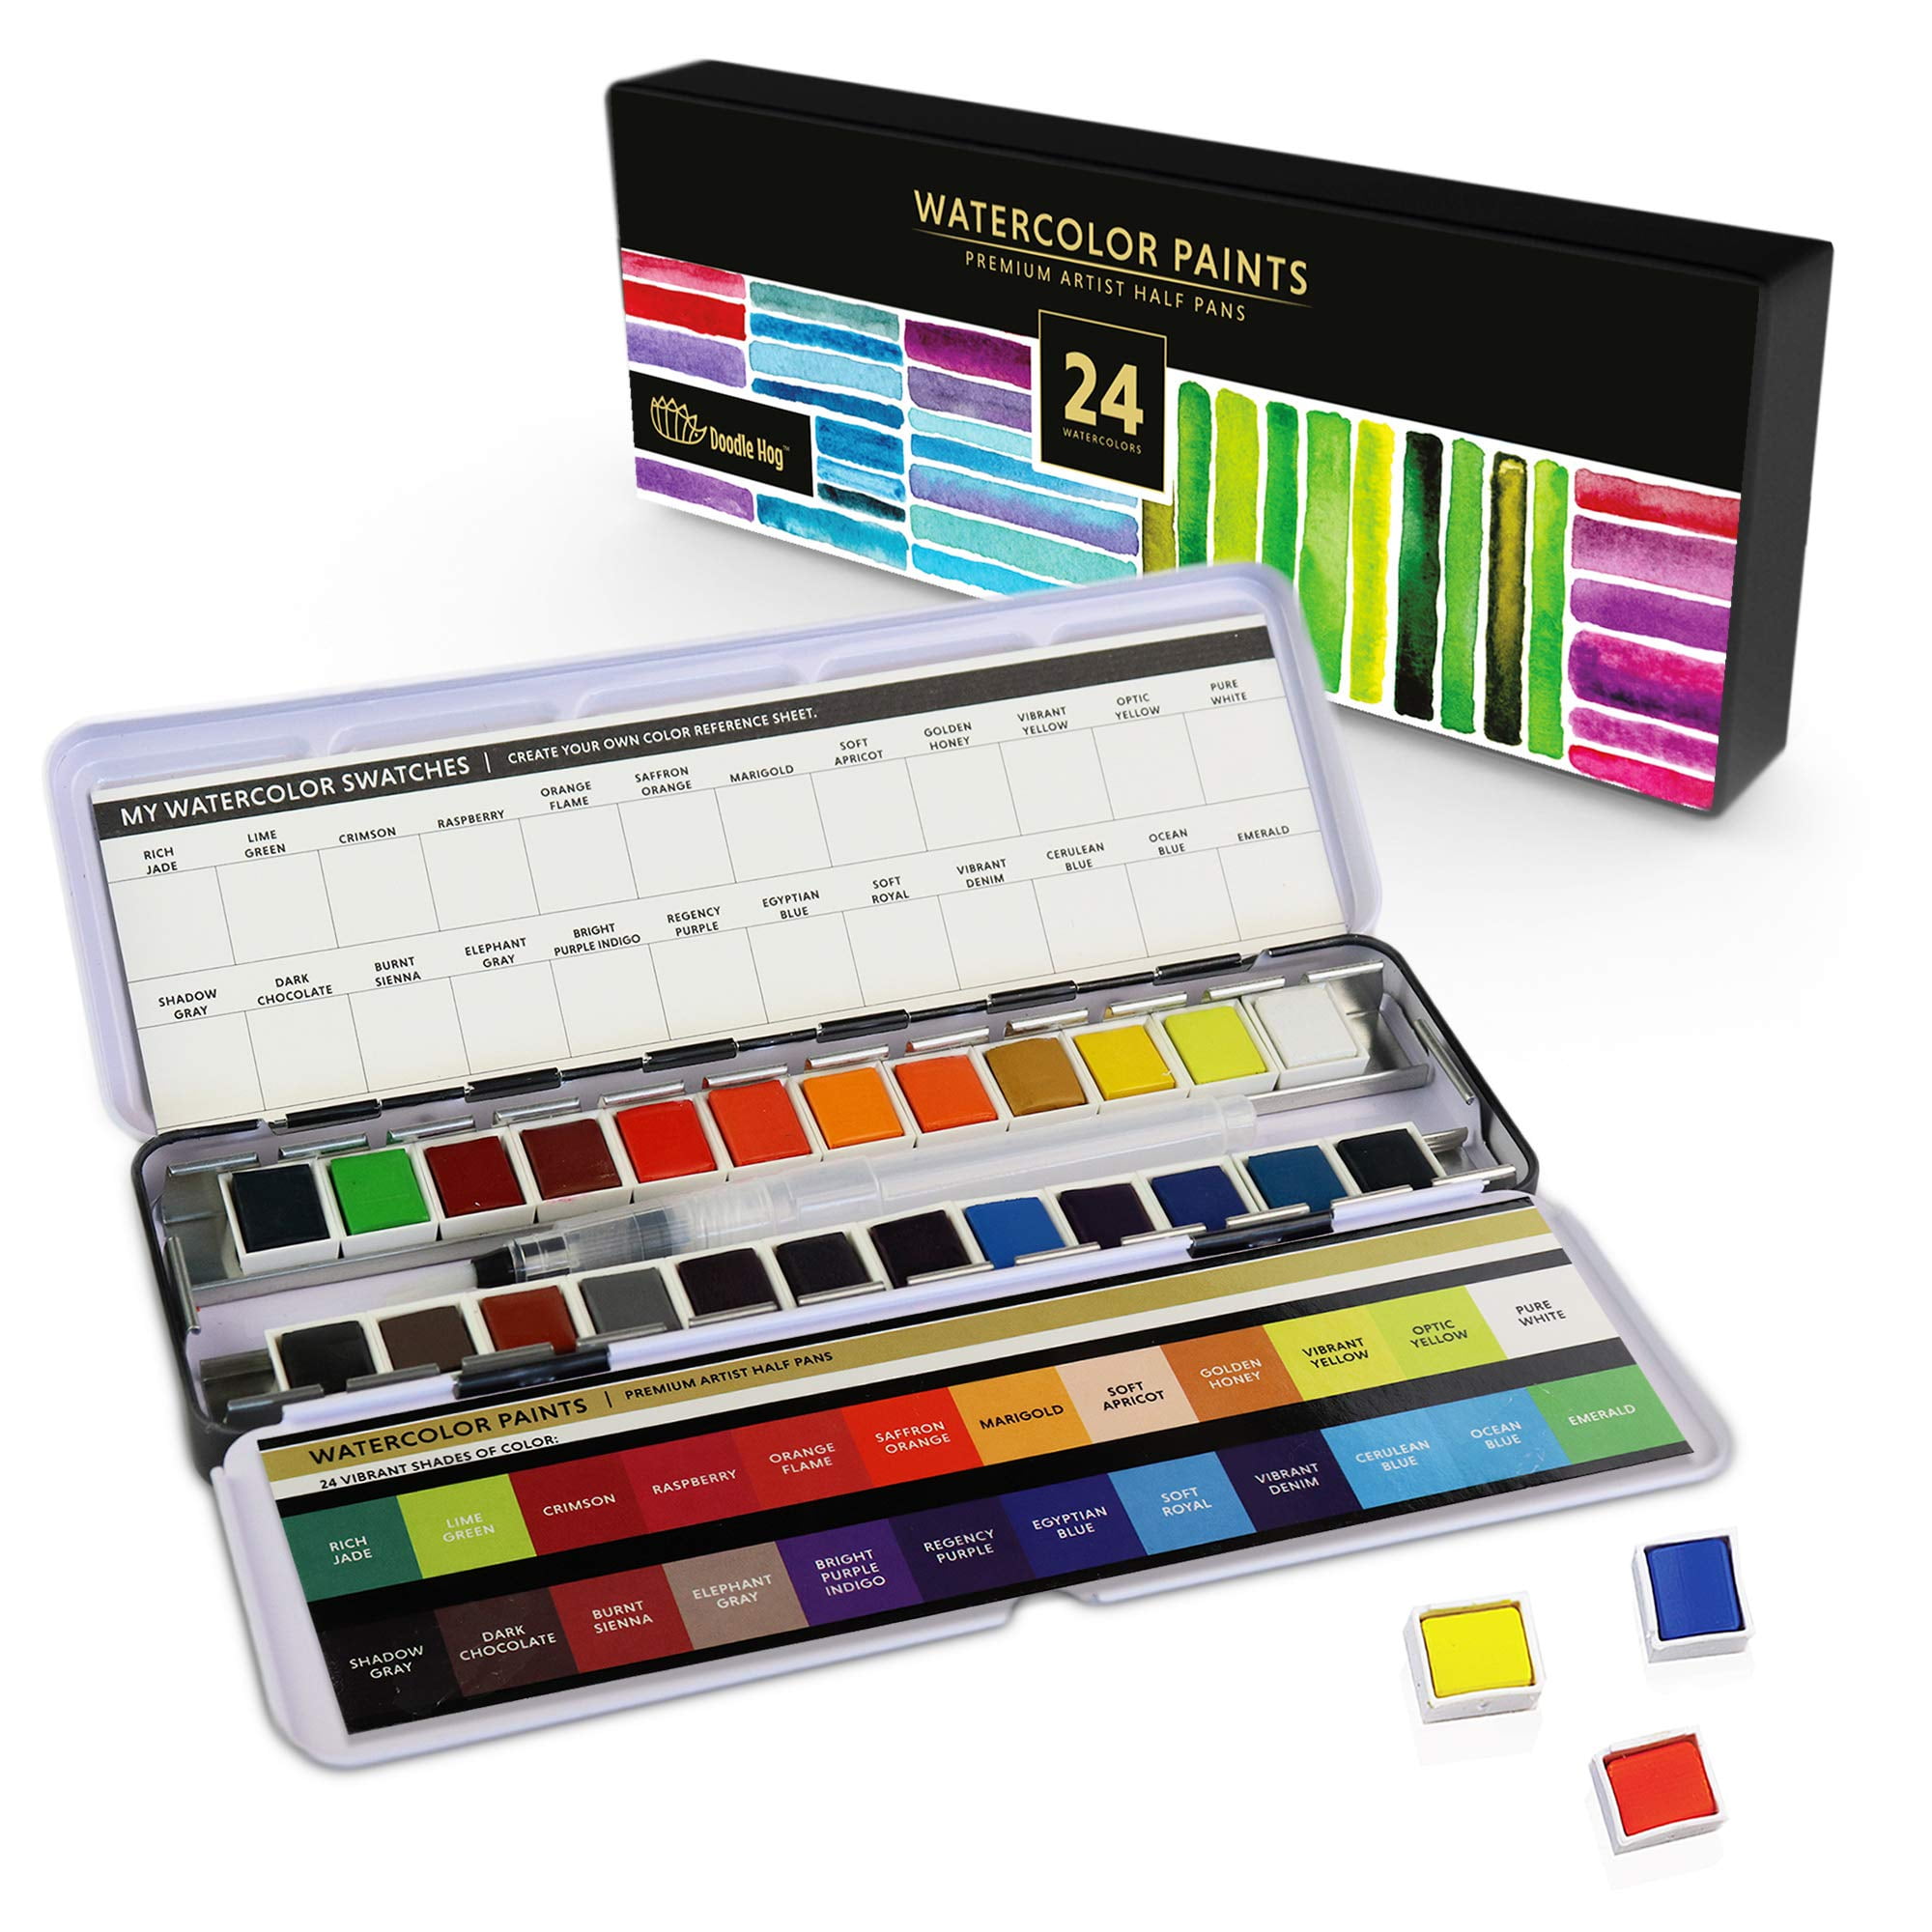 Doodle Hog The Ultimate 48 Premium Watercolor Half Pan Set in Metal Palette with True to Color Watercolor Paints, Refillable Water